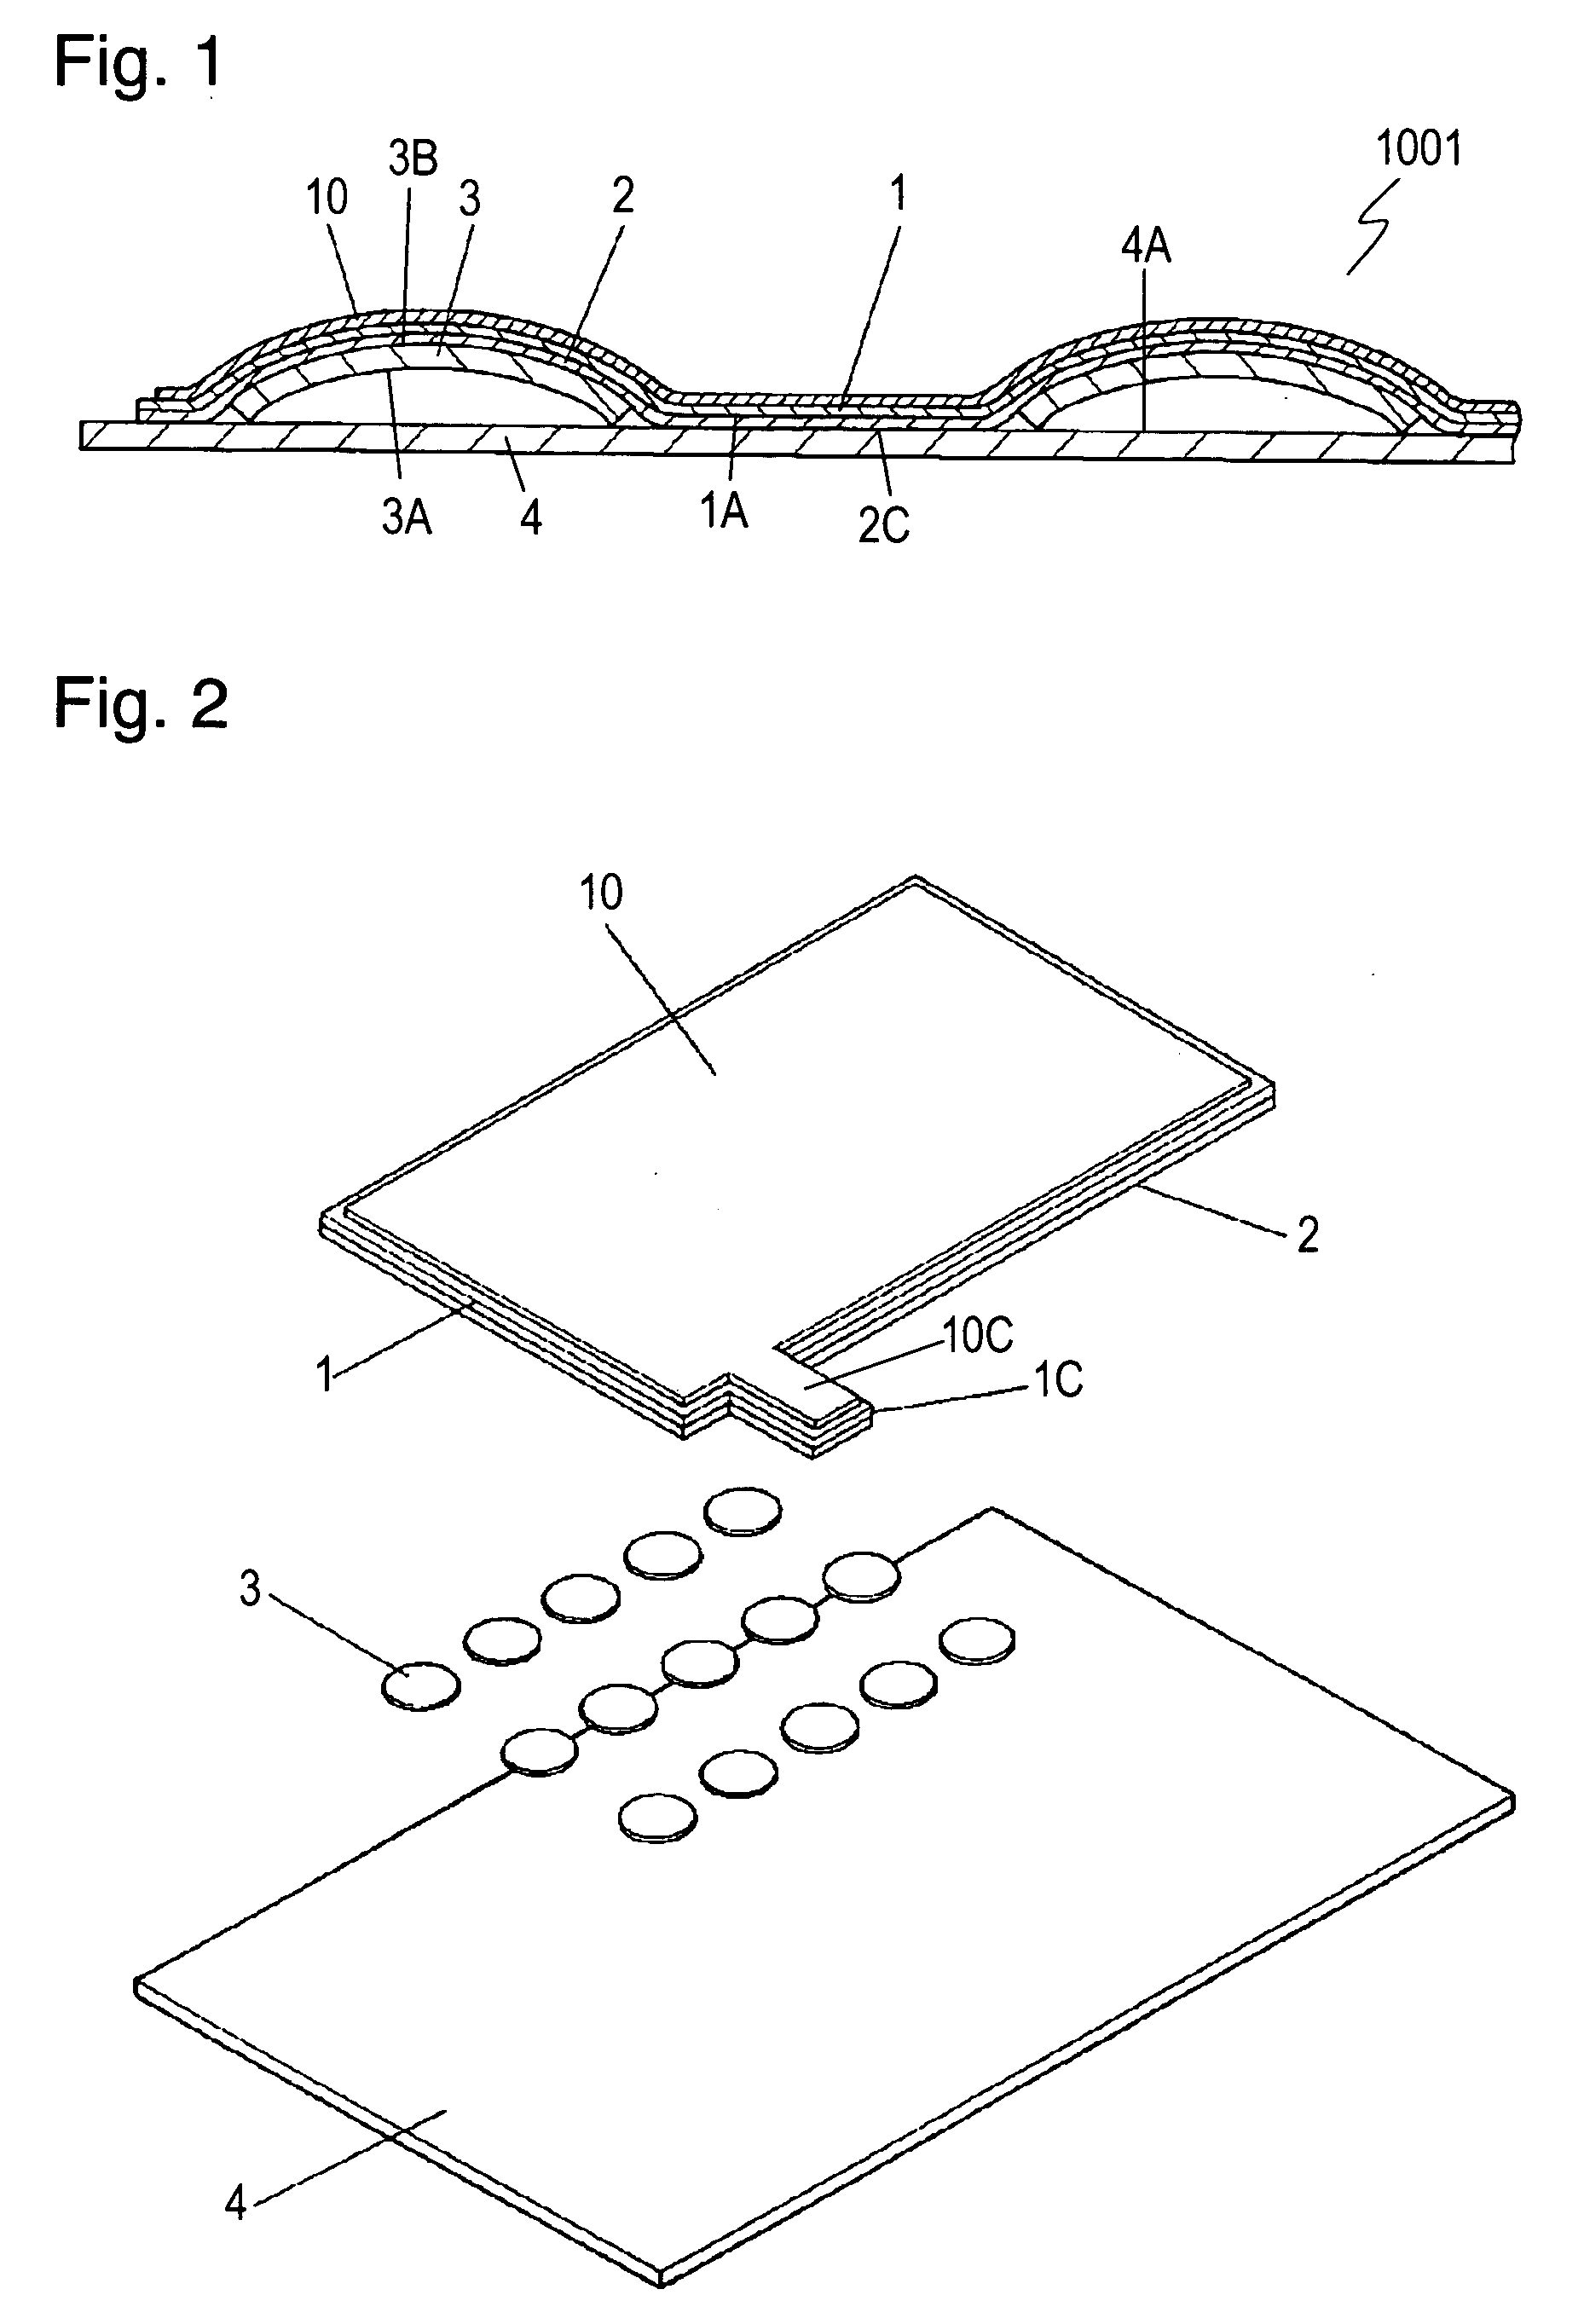 Movable contact assembly, method of manufacturing the same, and switch using the same